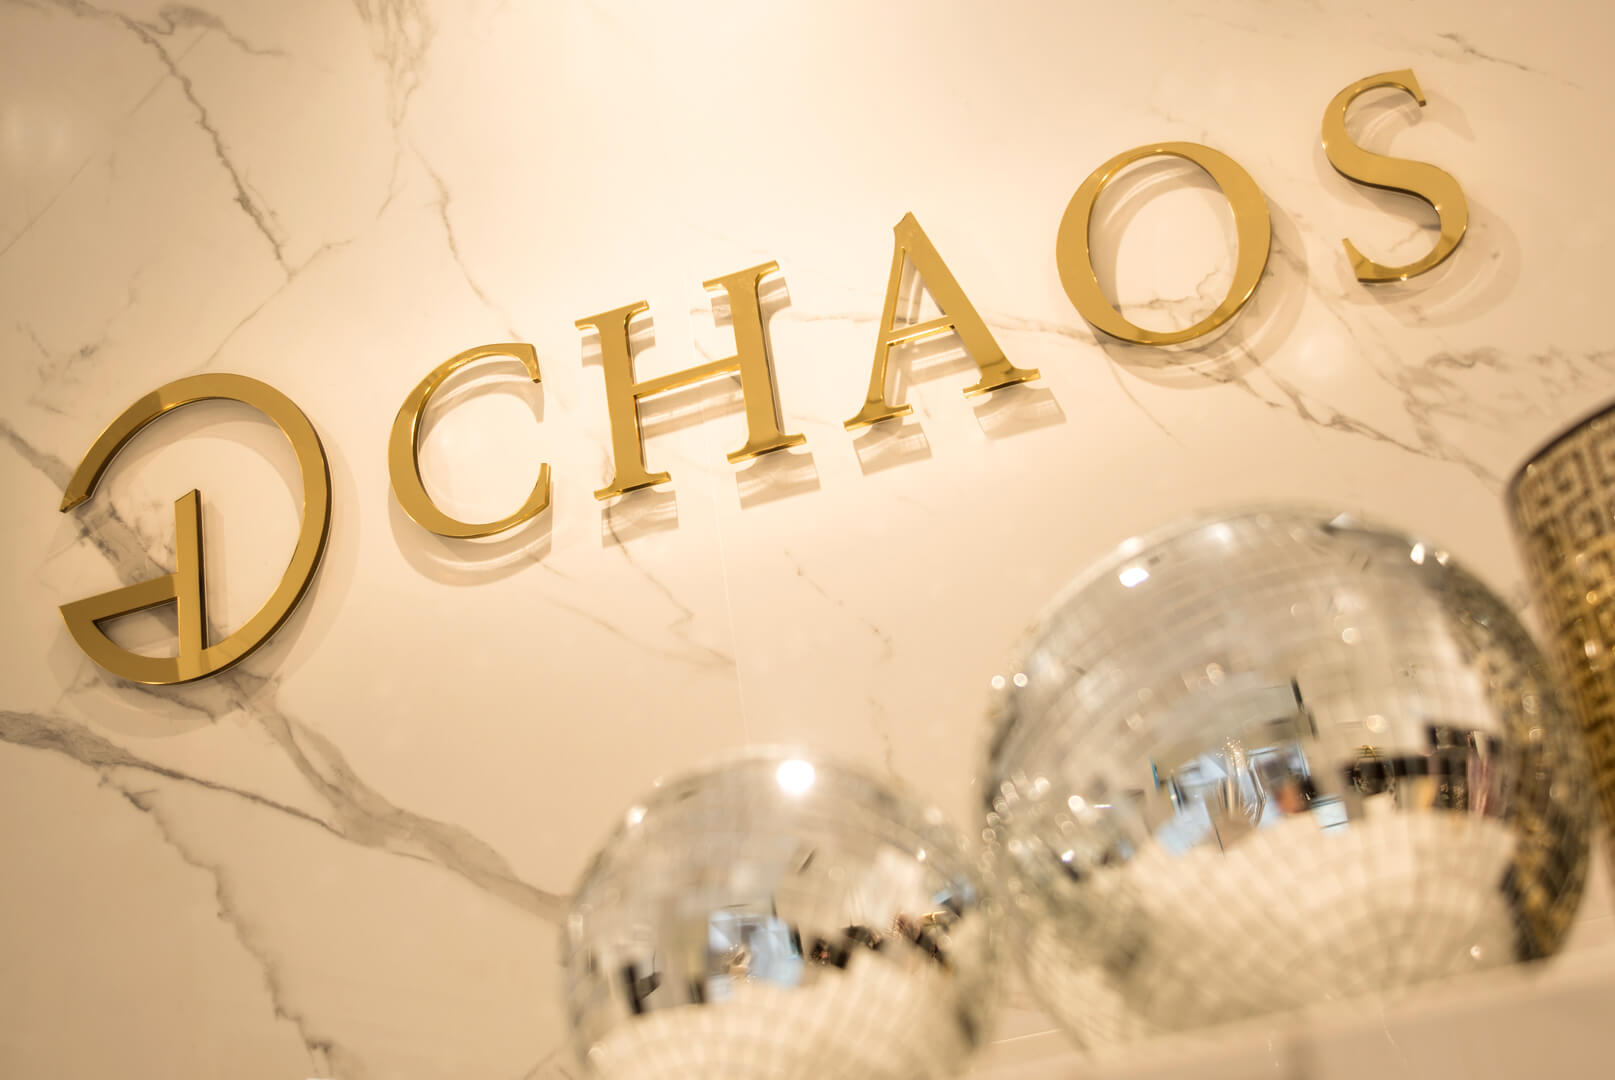 CHAOS - Chaos - gold logo and 3D block letters made of Plexiglas placed on the wall